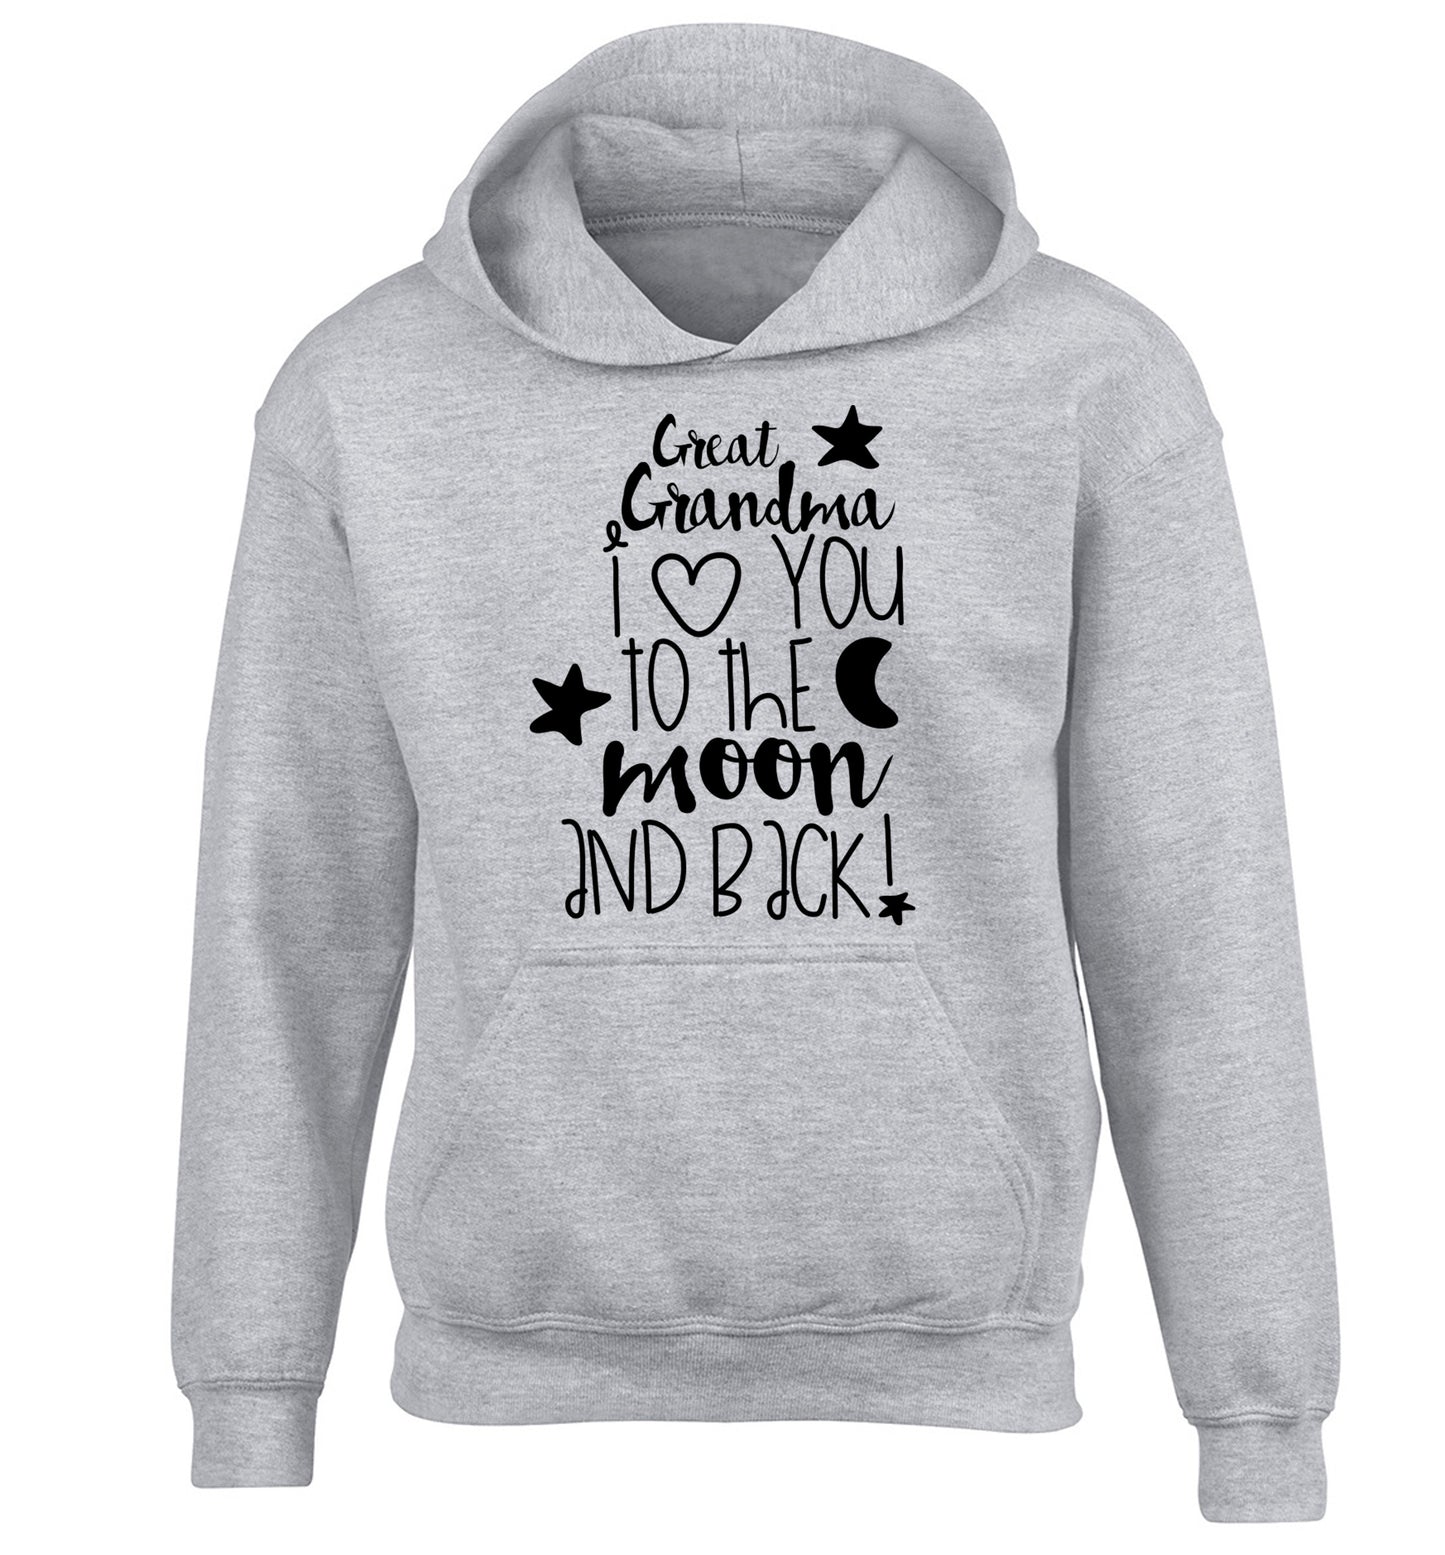 Great Grandma I love you to the moon and back children's grey hoodie 12-14 Years